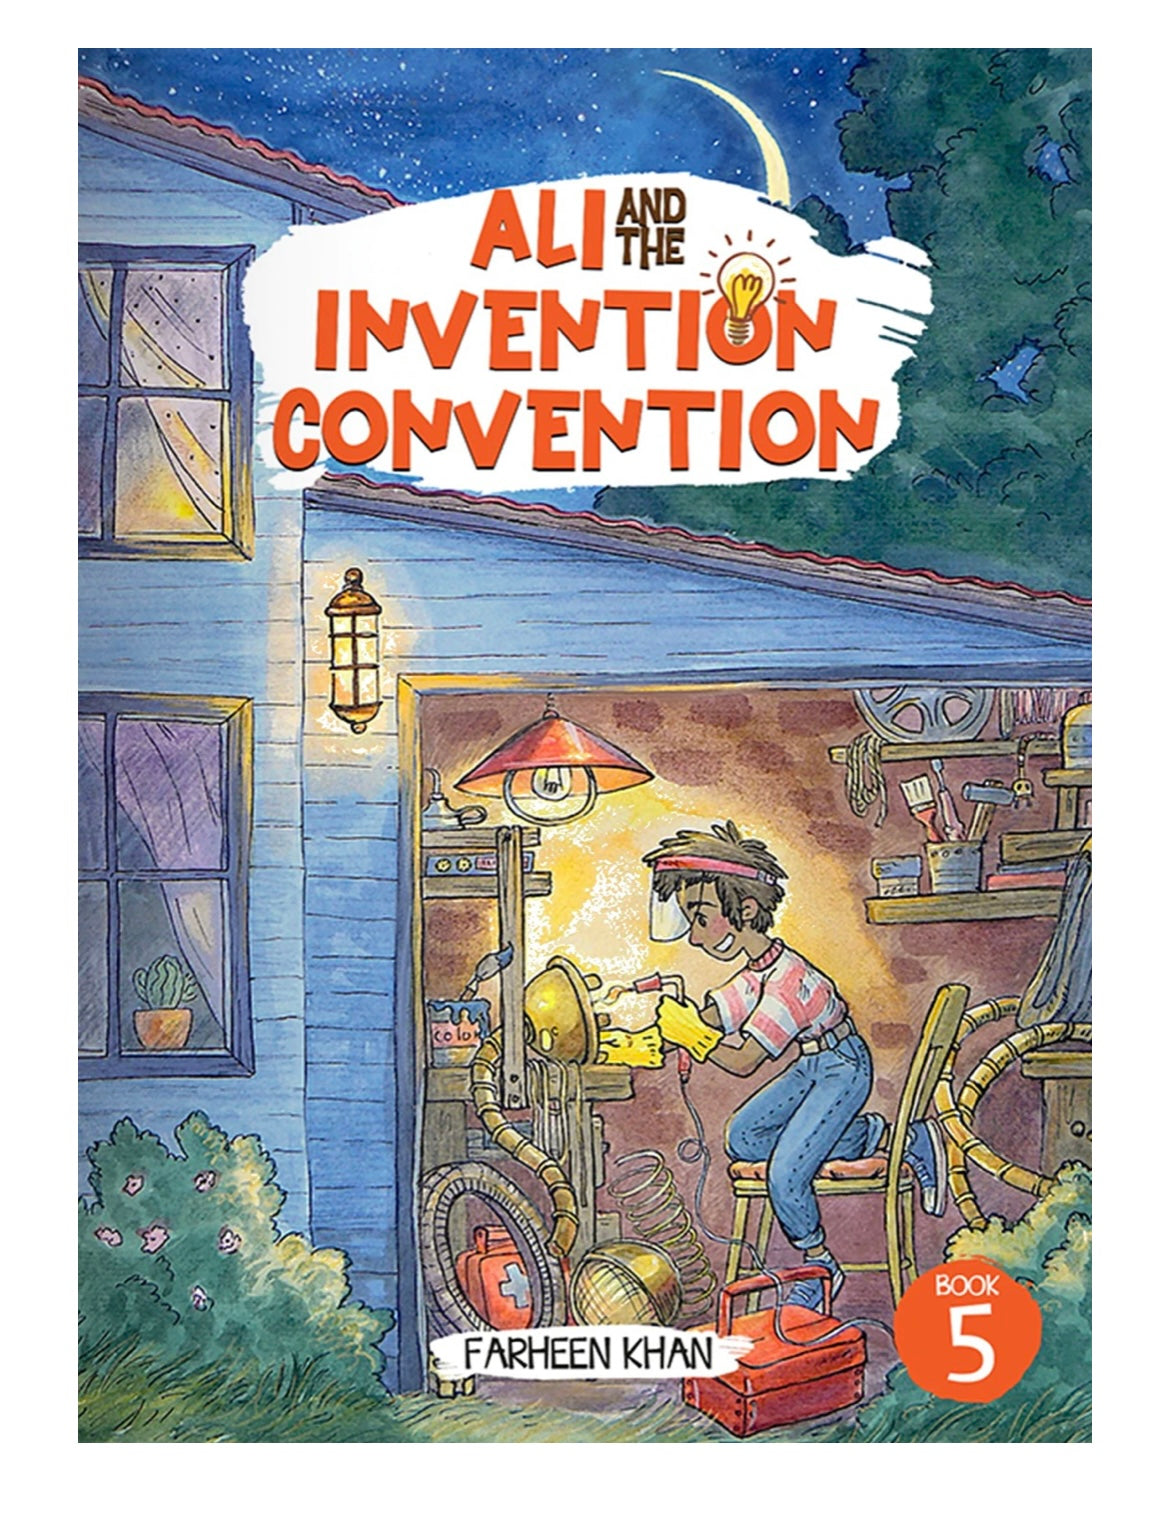 Ali and the Invention Convention